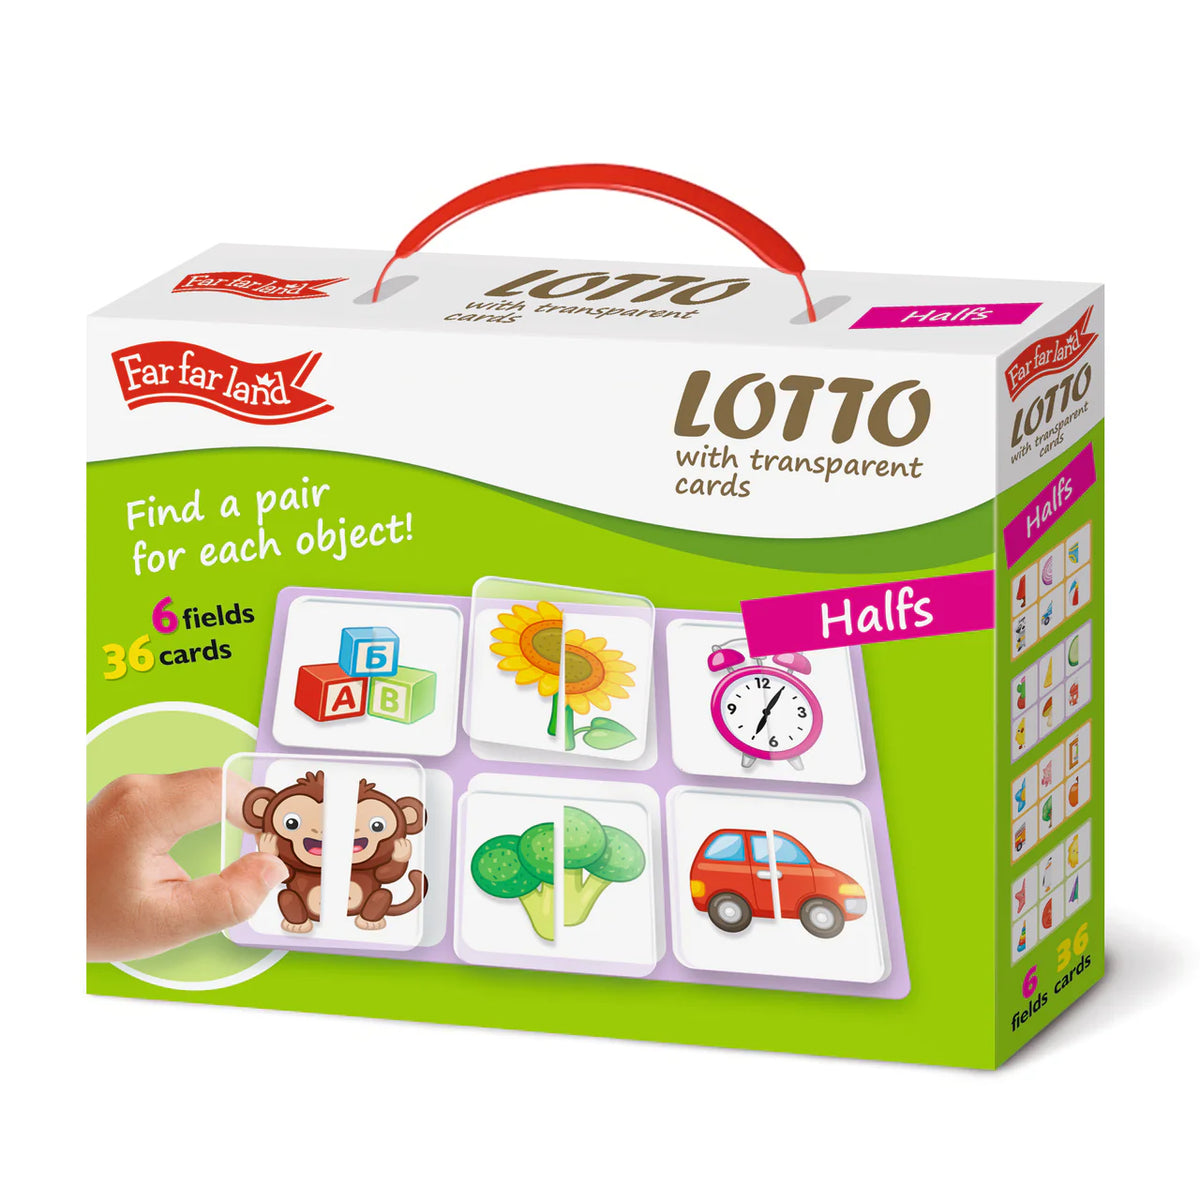 LOTTO - with transparent cards - halves